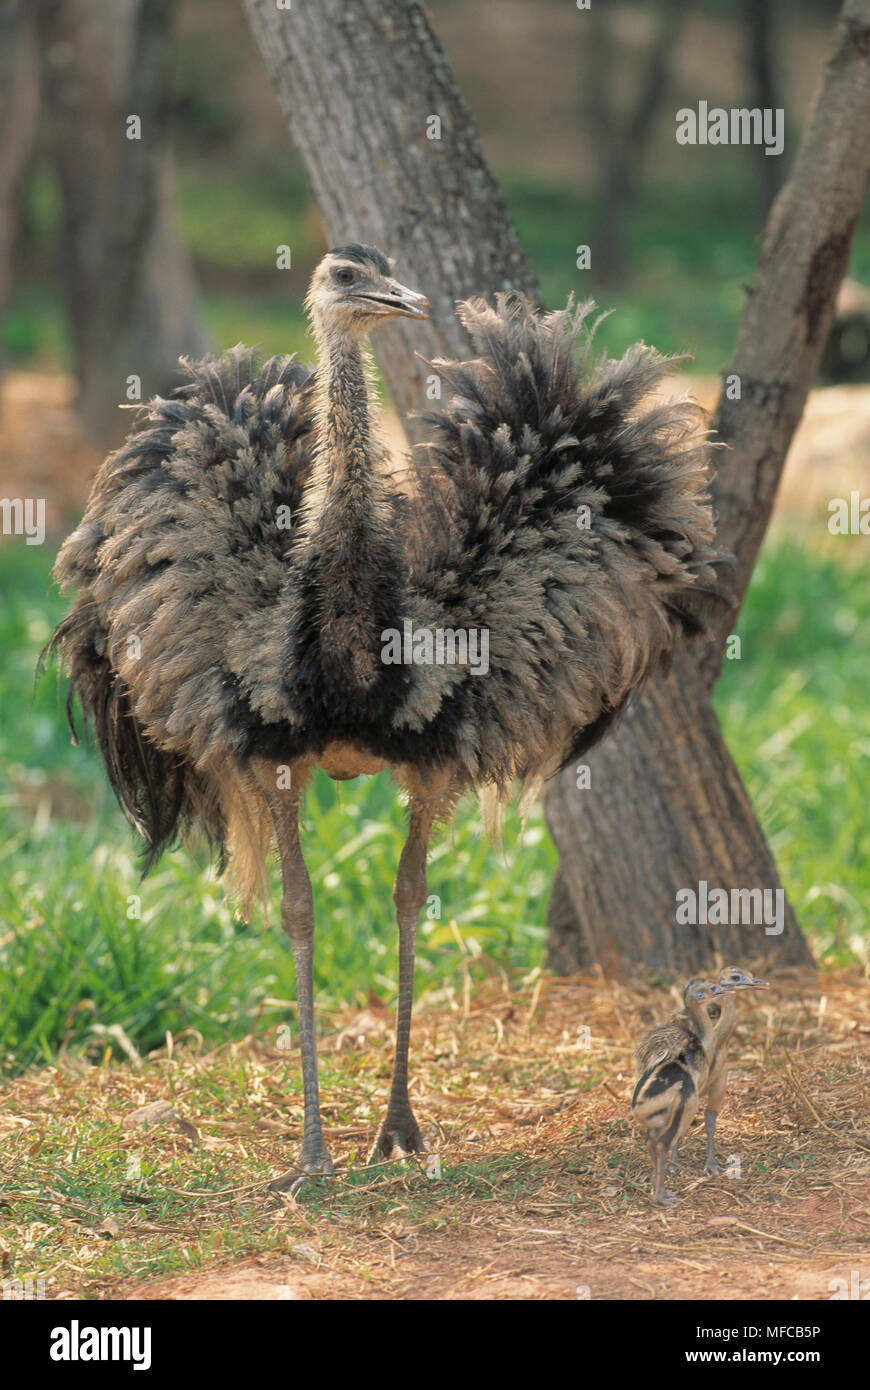 COMMON or GREATER RHEA Rhea americana with young, Pantanal, Mato Grosso, Brazil Stock Photo